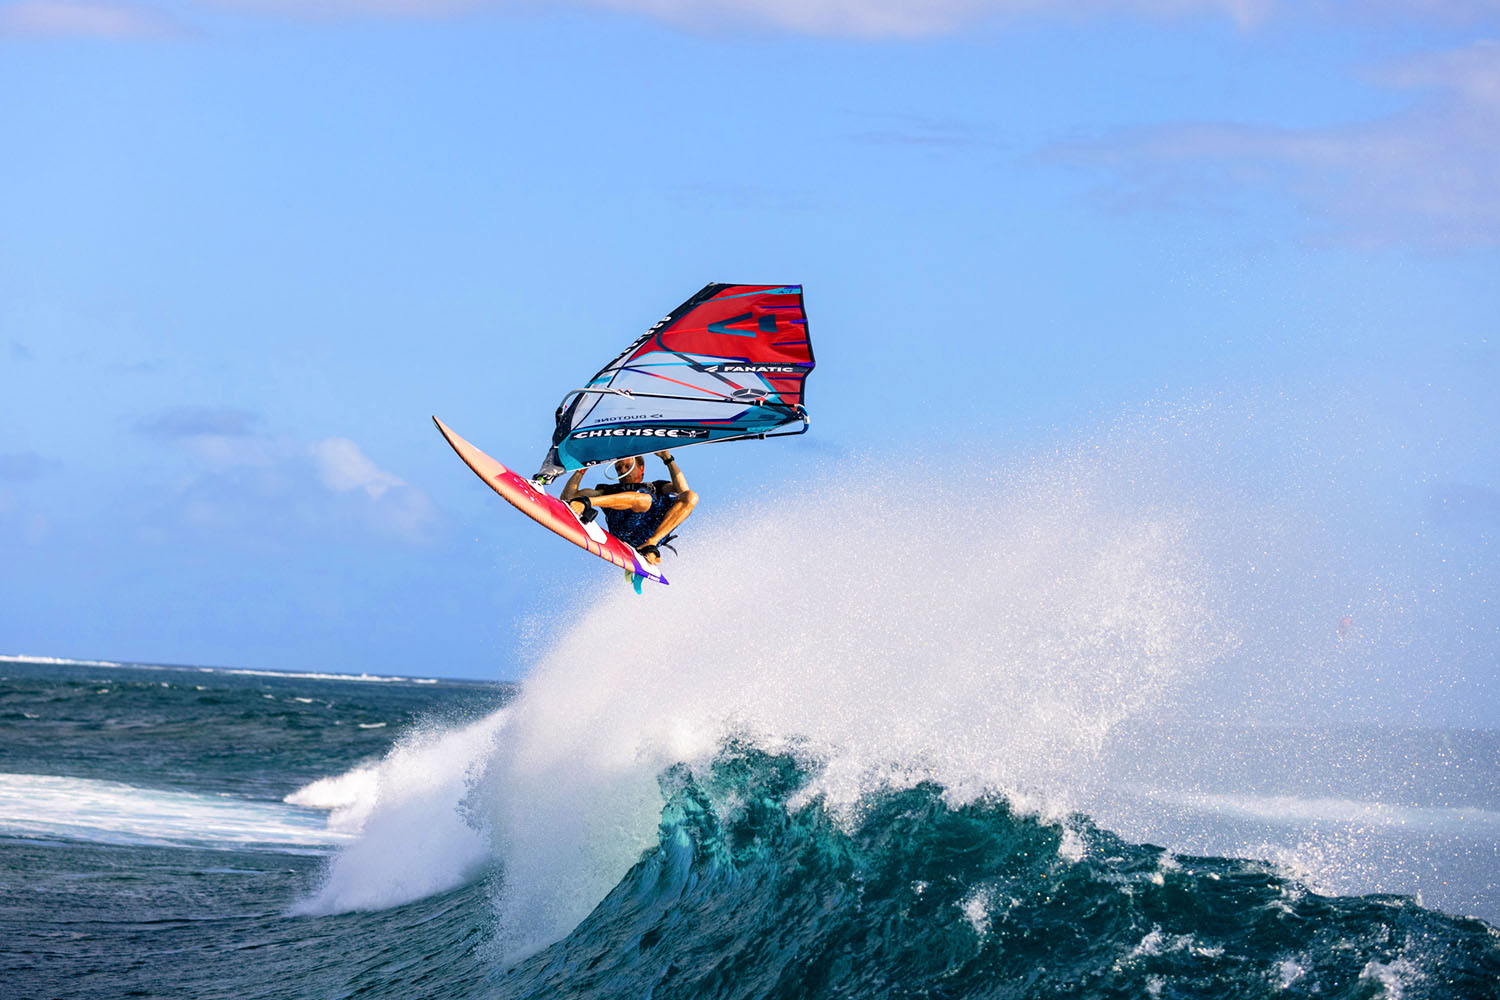 A windsurf on a wave in front of ION CLUB Mauritius Le Morne